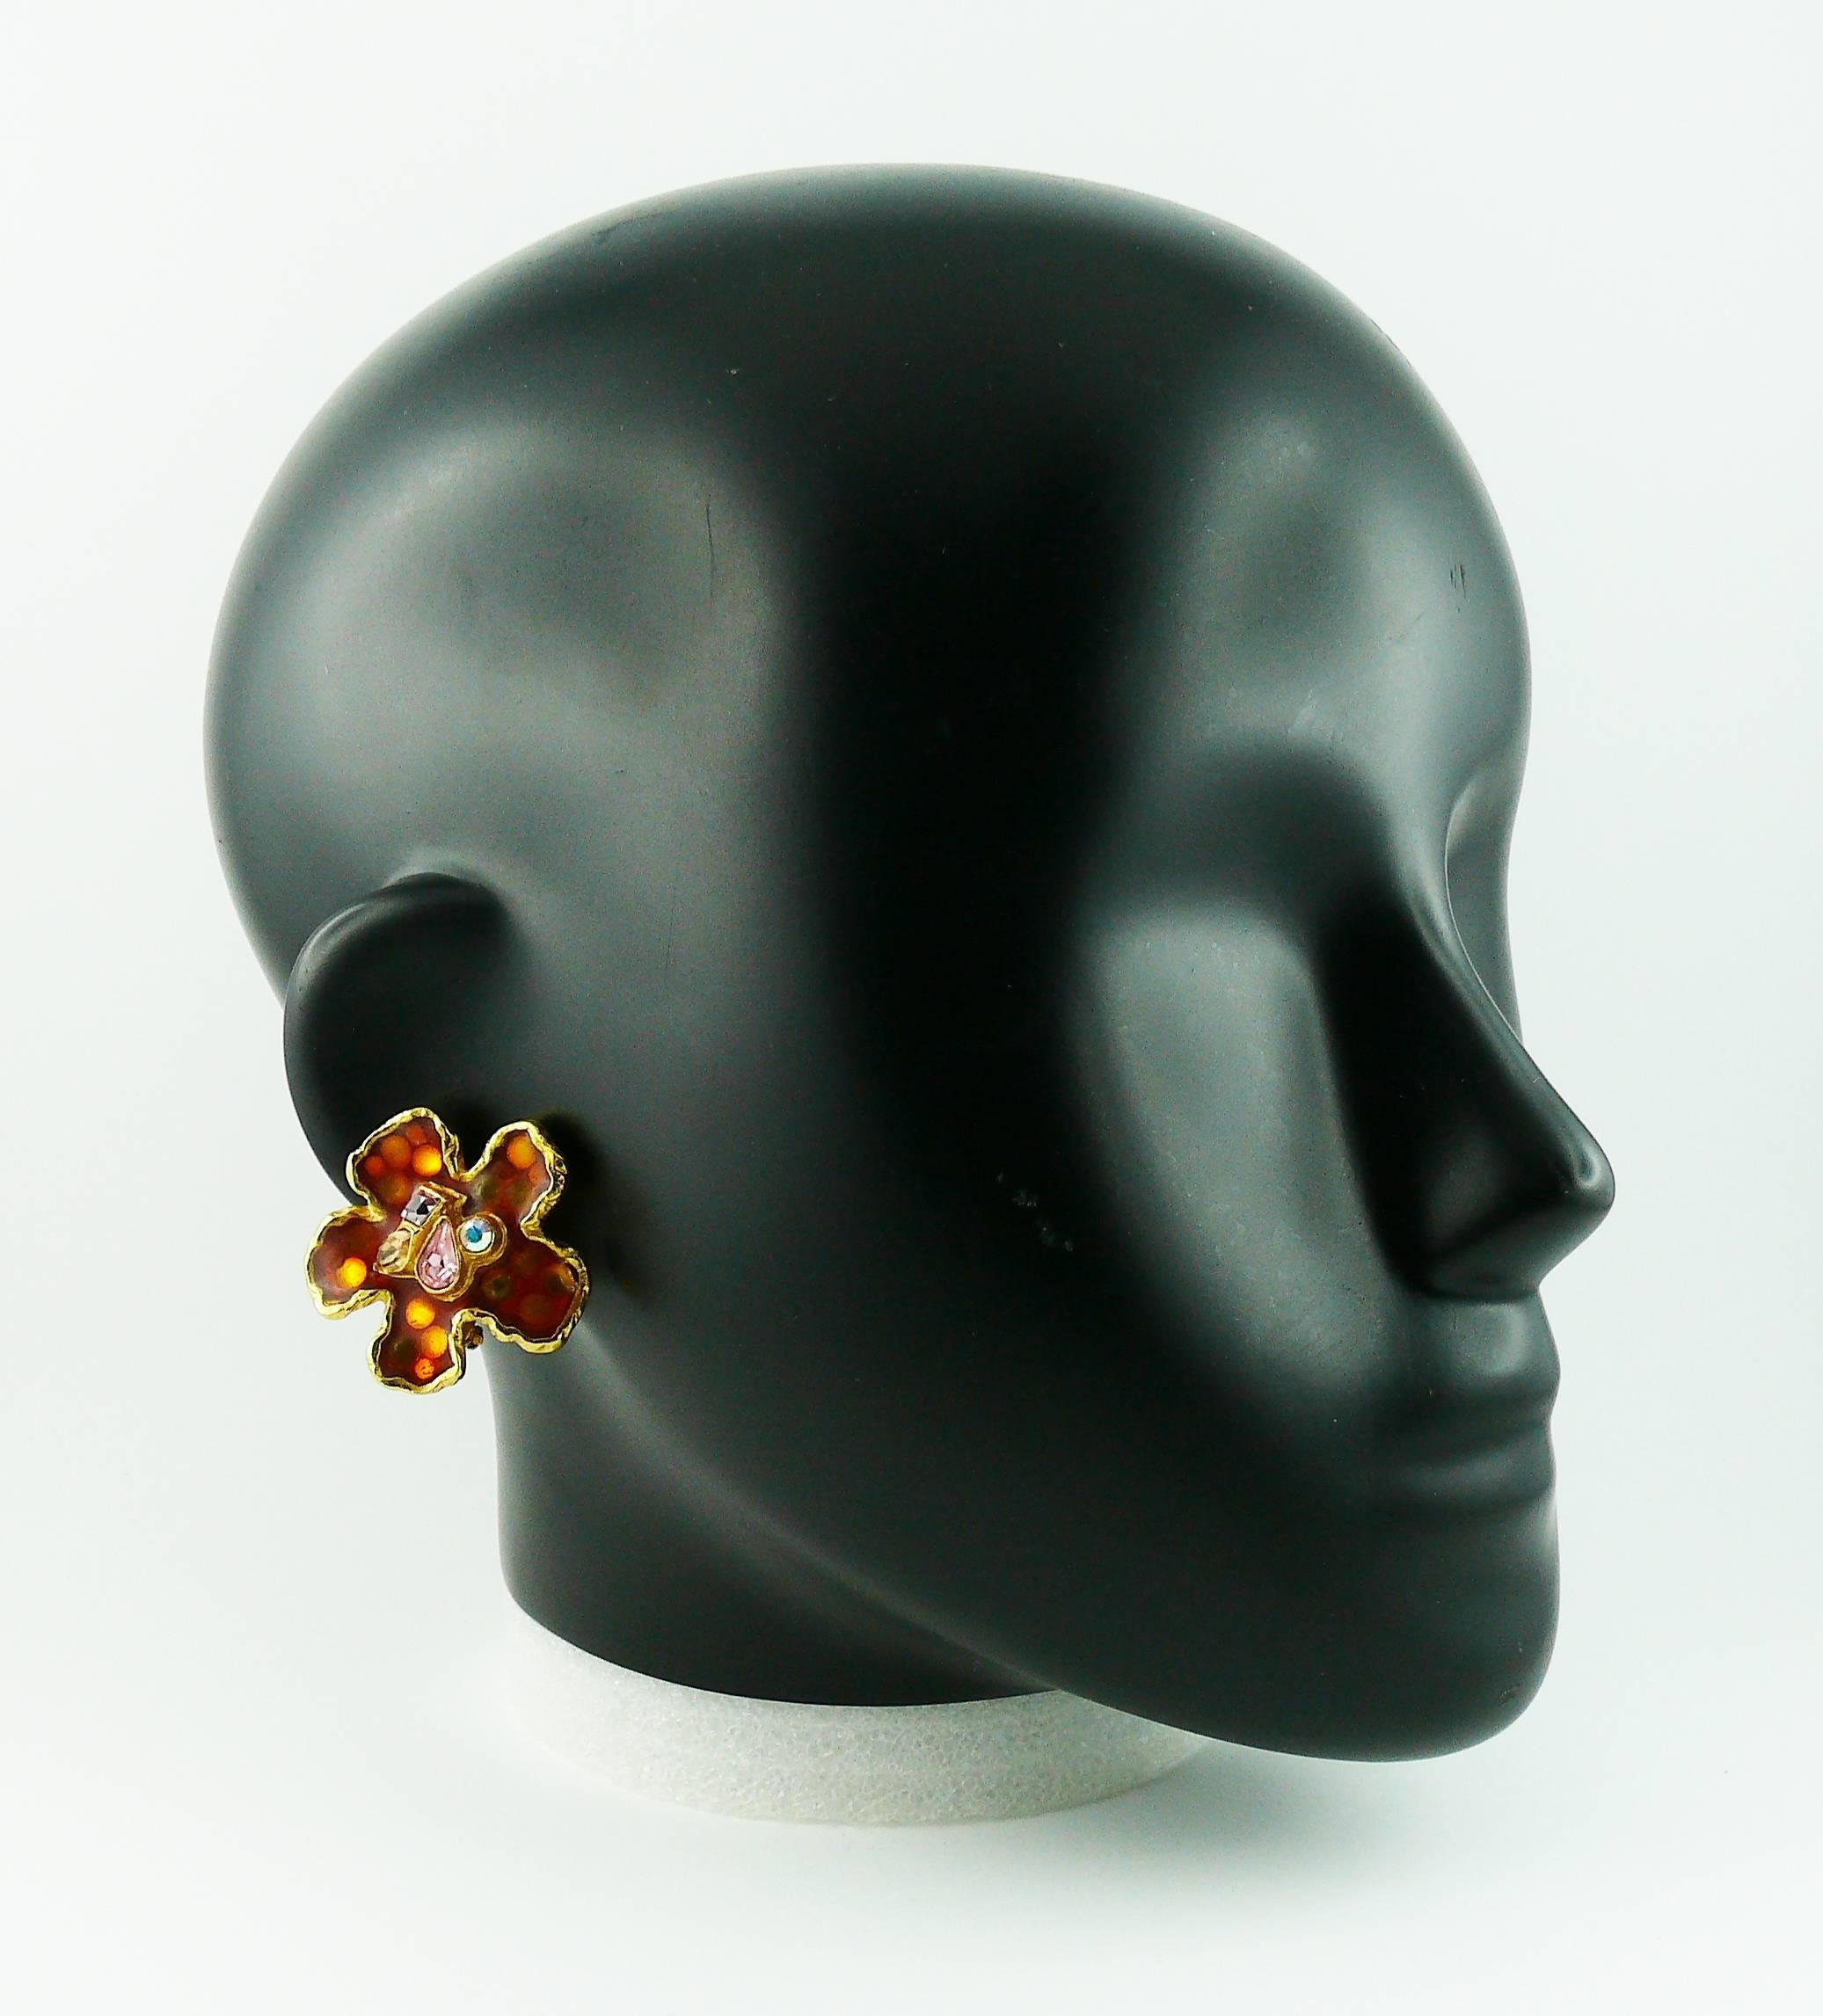 CHRISTIAN LACROIX vintage gold tone enameled flower clip-on earrings with multicolored crystal embellishement.

Marked CHRISTIAN LACROIX CL Made in France.

JEWELRY CONDITION CHART
- New or never worn : item is in pristine condition with no